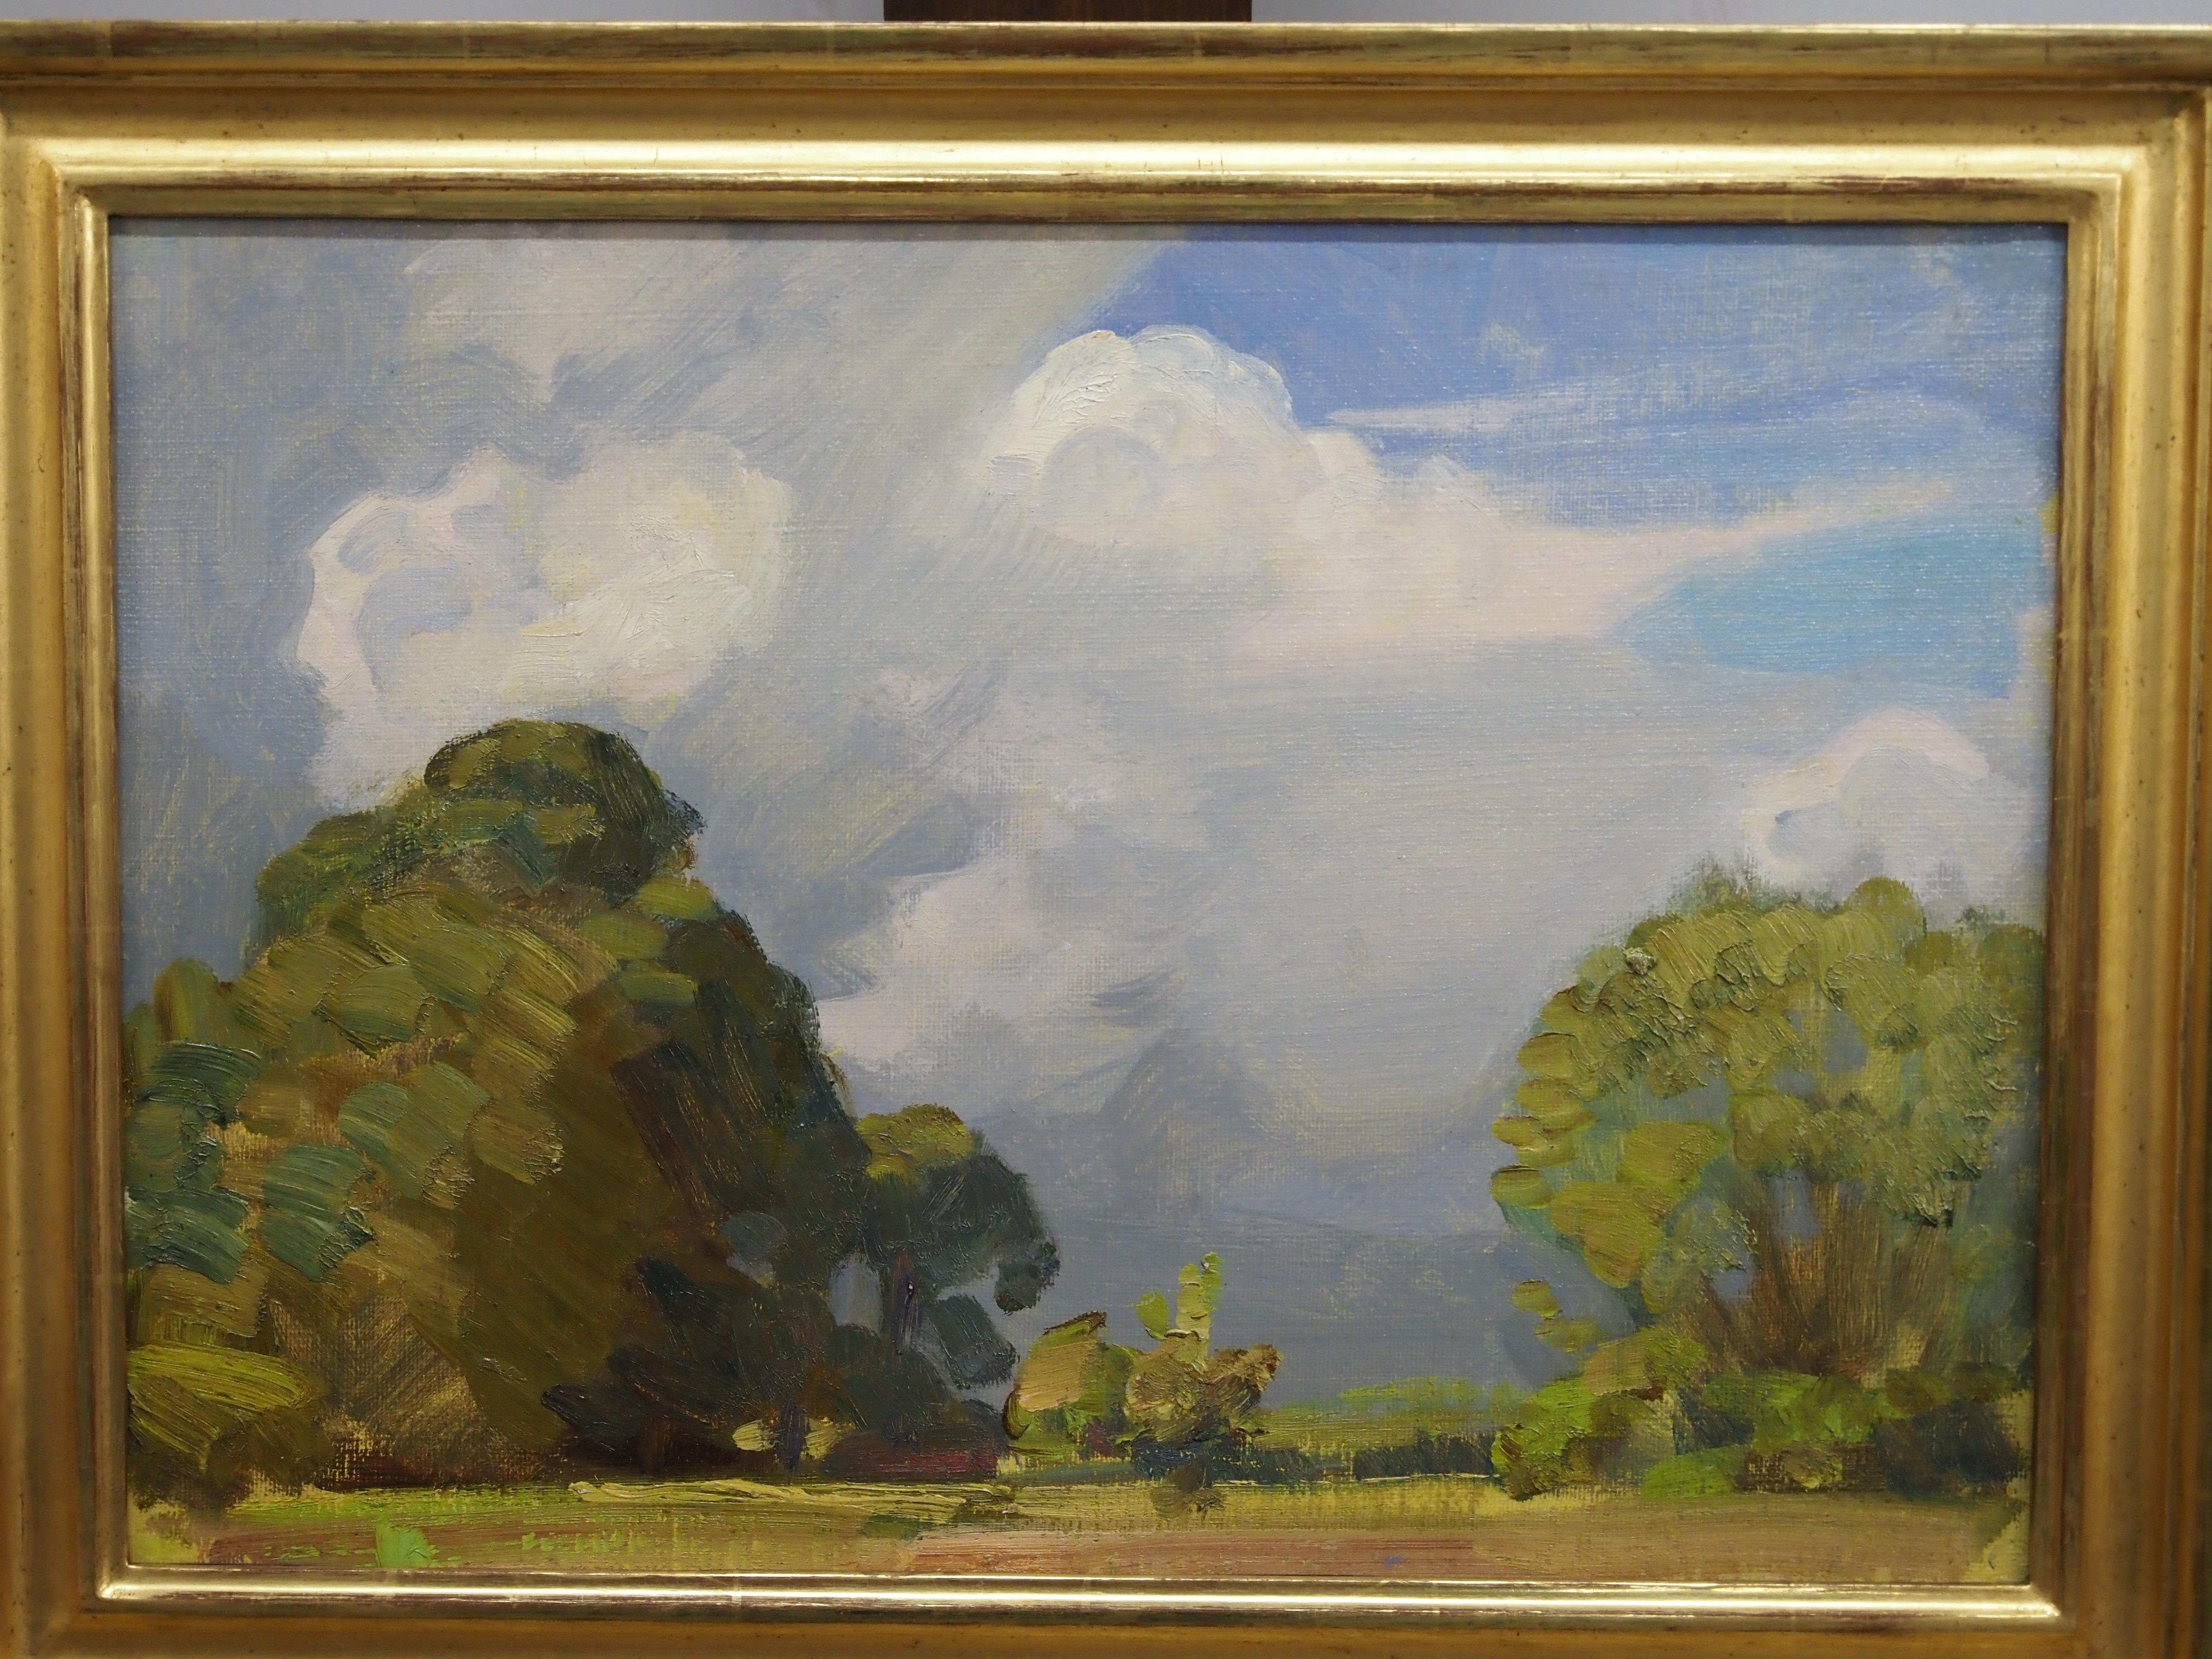 Landscape Study - Post-Impressionist Painting by Harold Speed